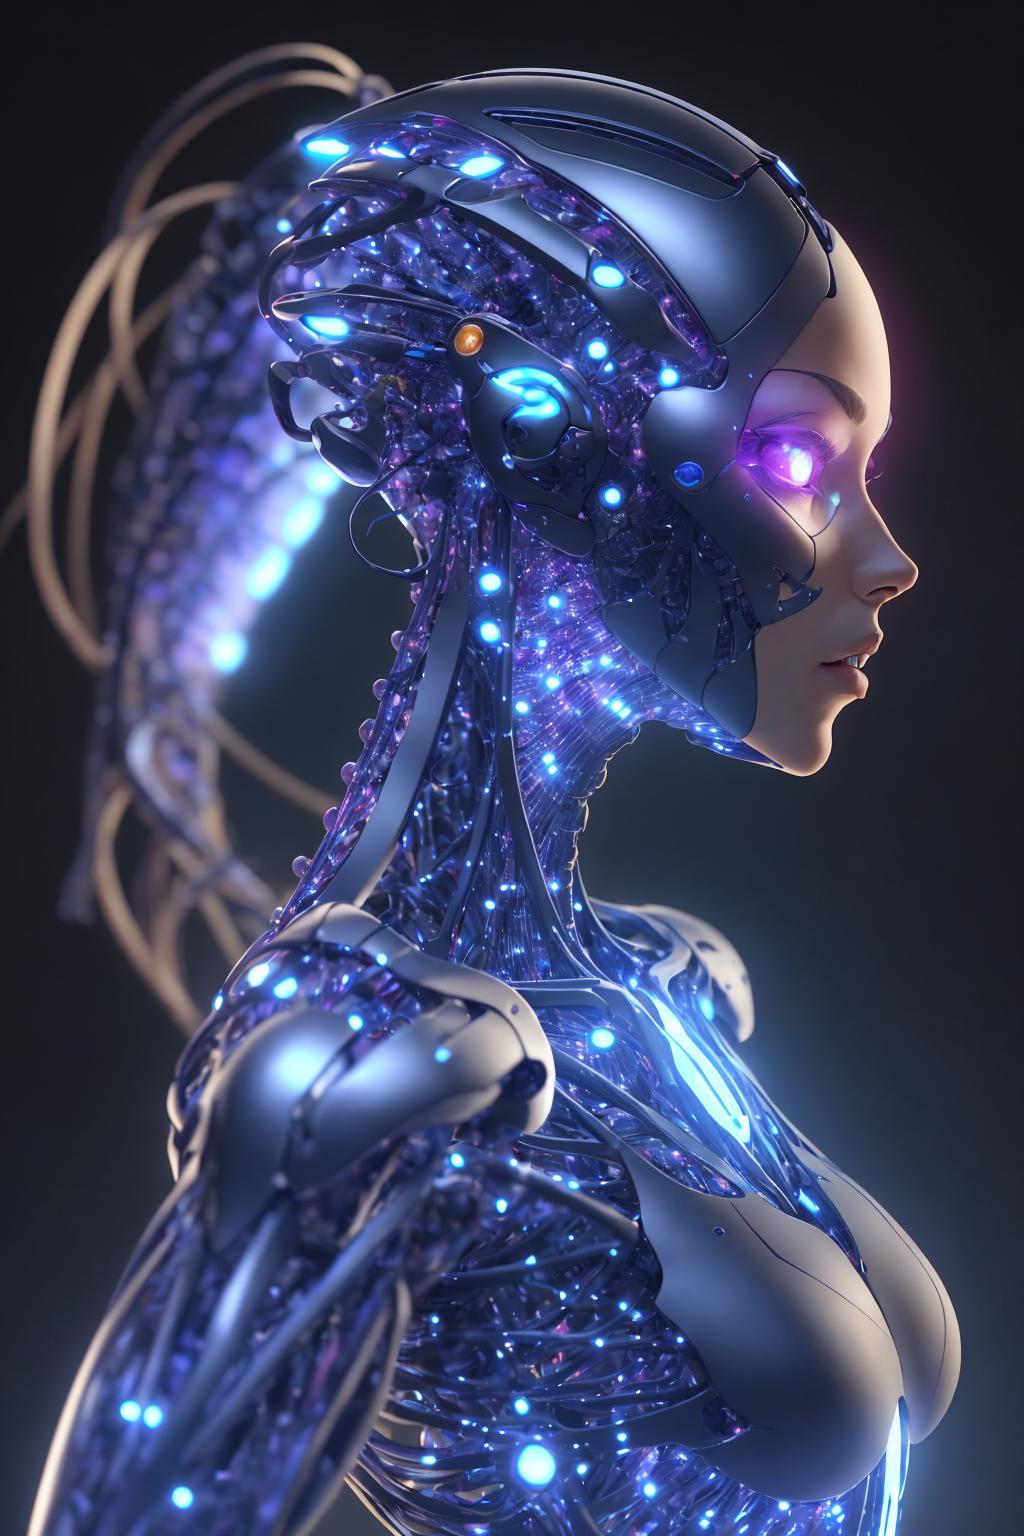 A 3D Render of a Futuristic Robot Woman with Purple Eyes and a Blue Body.